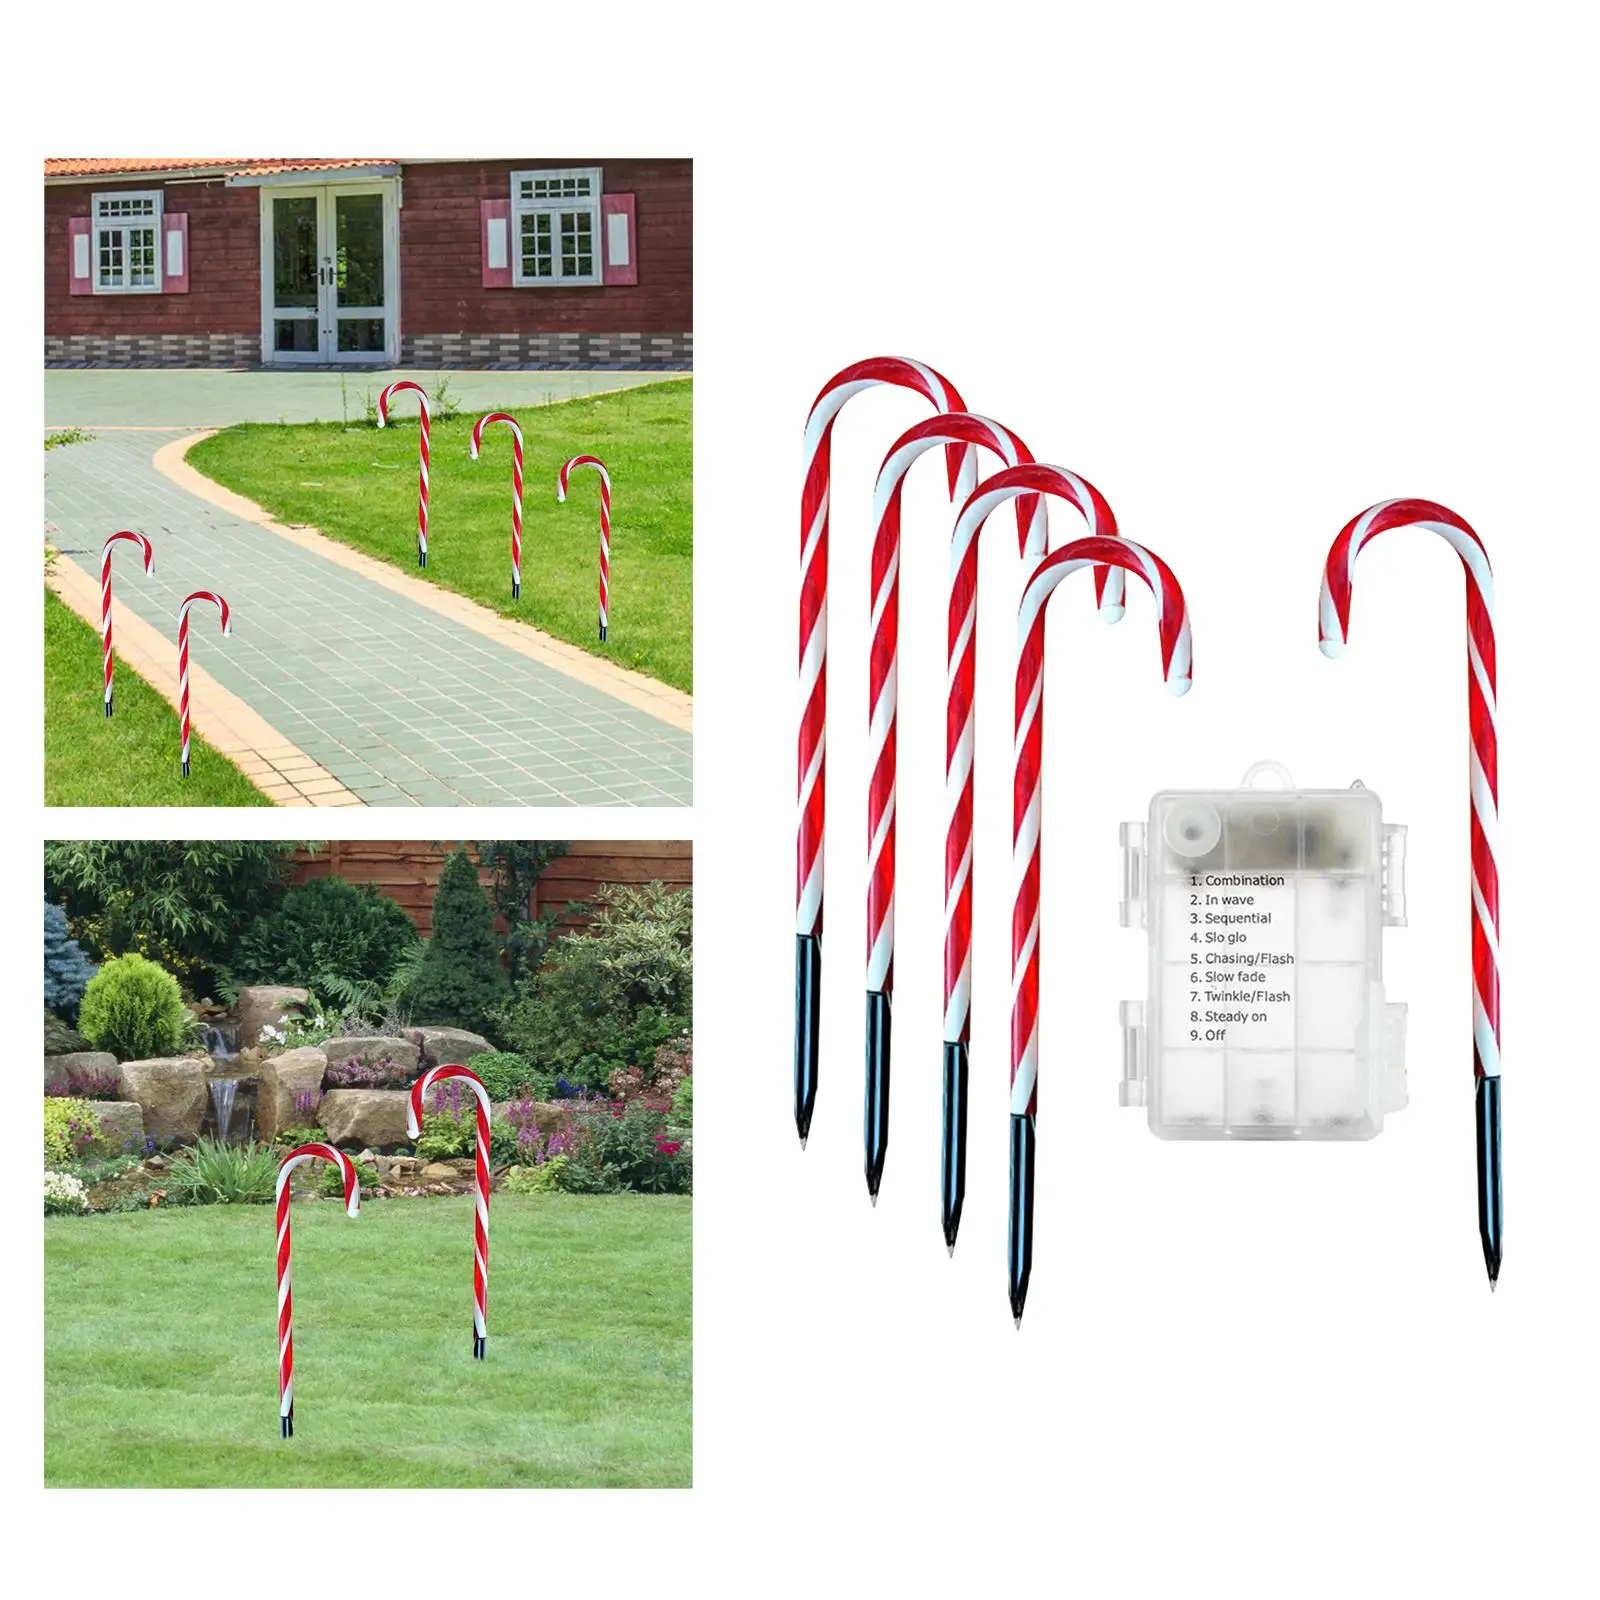 Christmas LED Lamps Ornaments Pathway String Candy Cane Battery Operated Lights for Holiday Backyard Lawn Garden